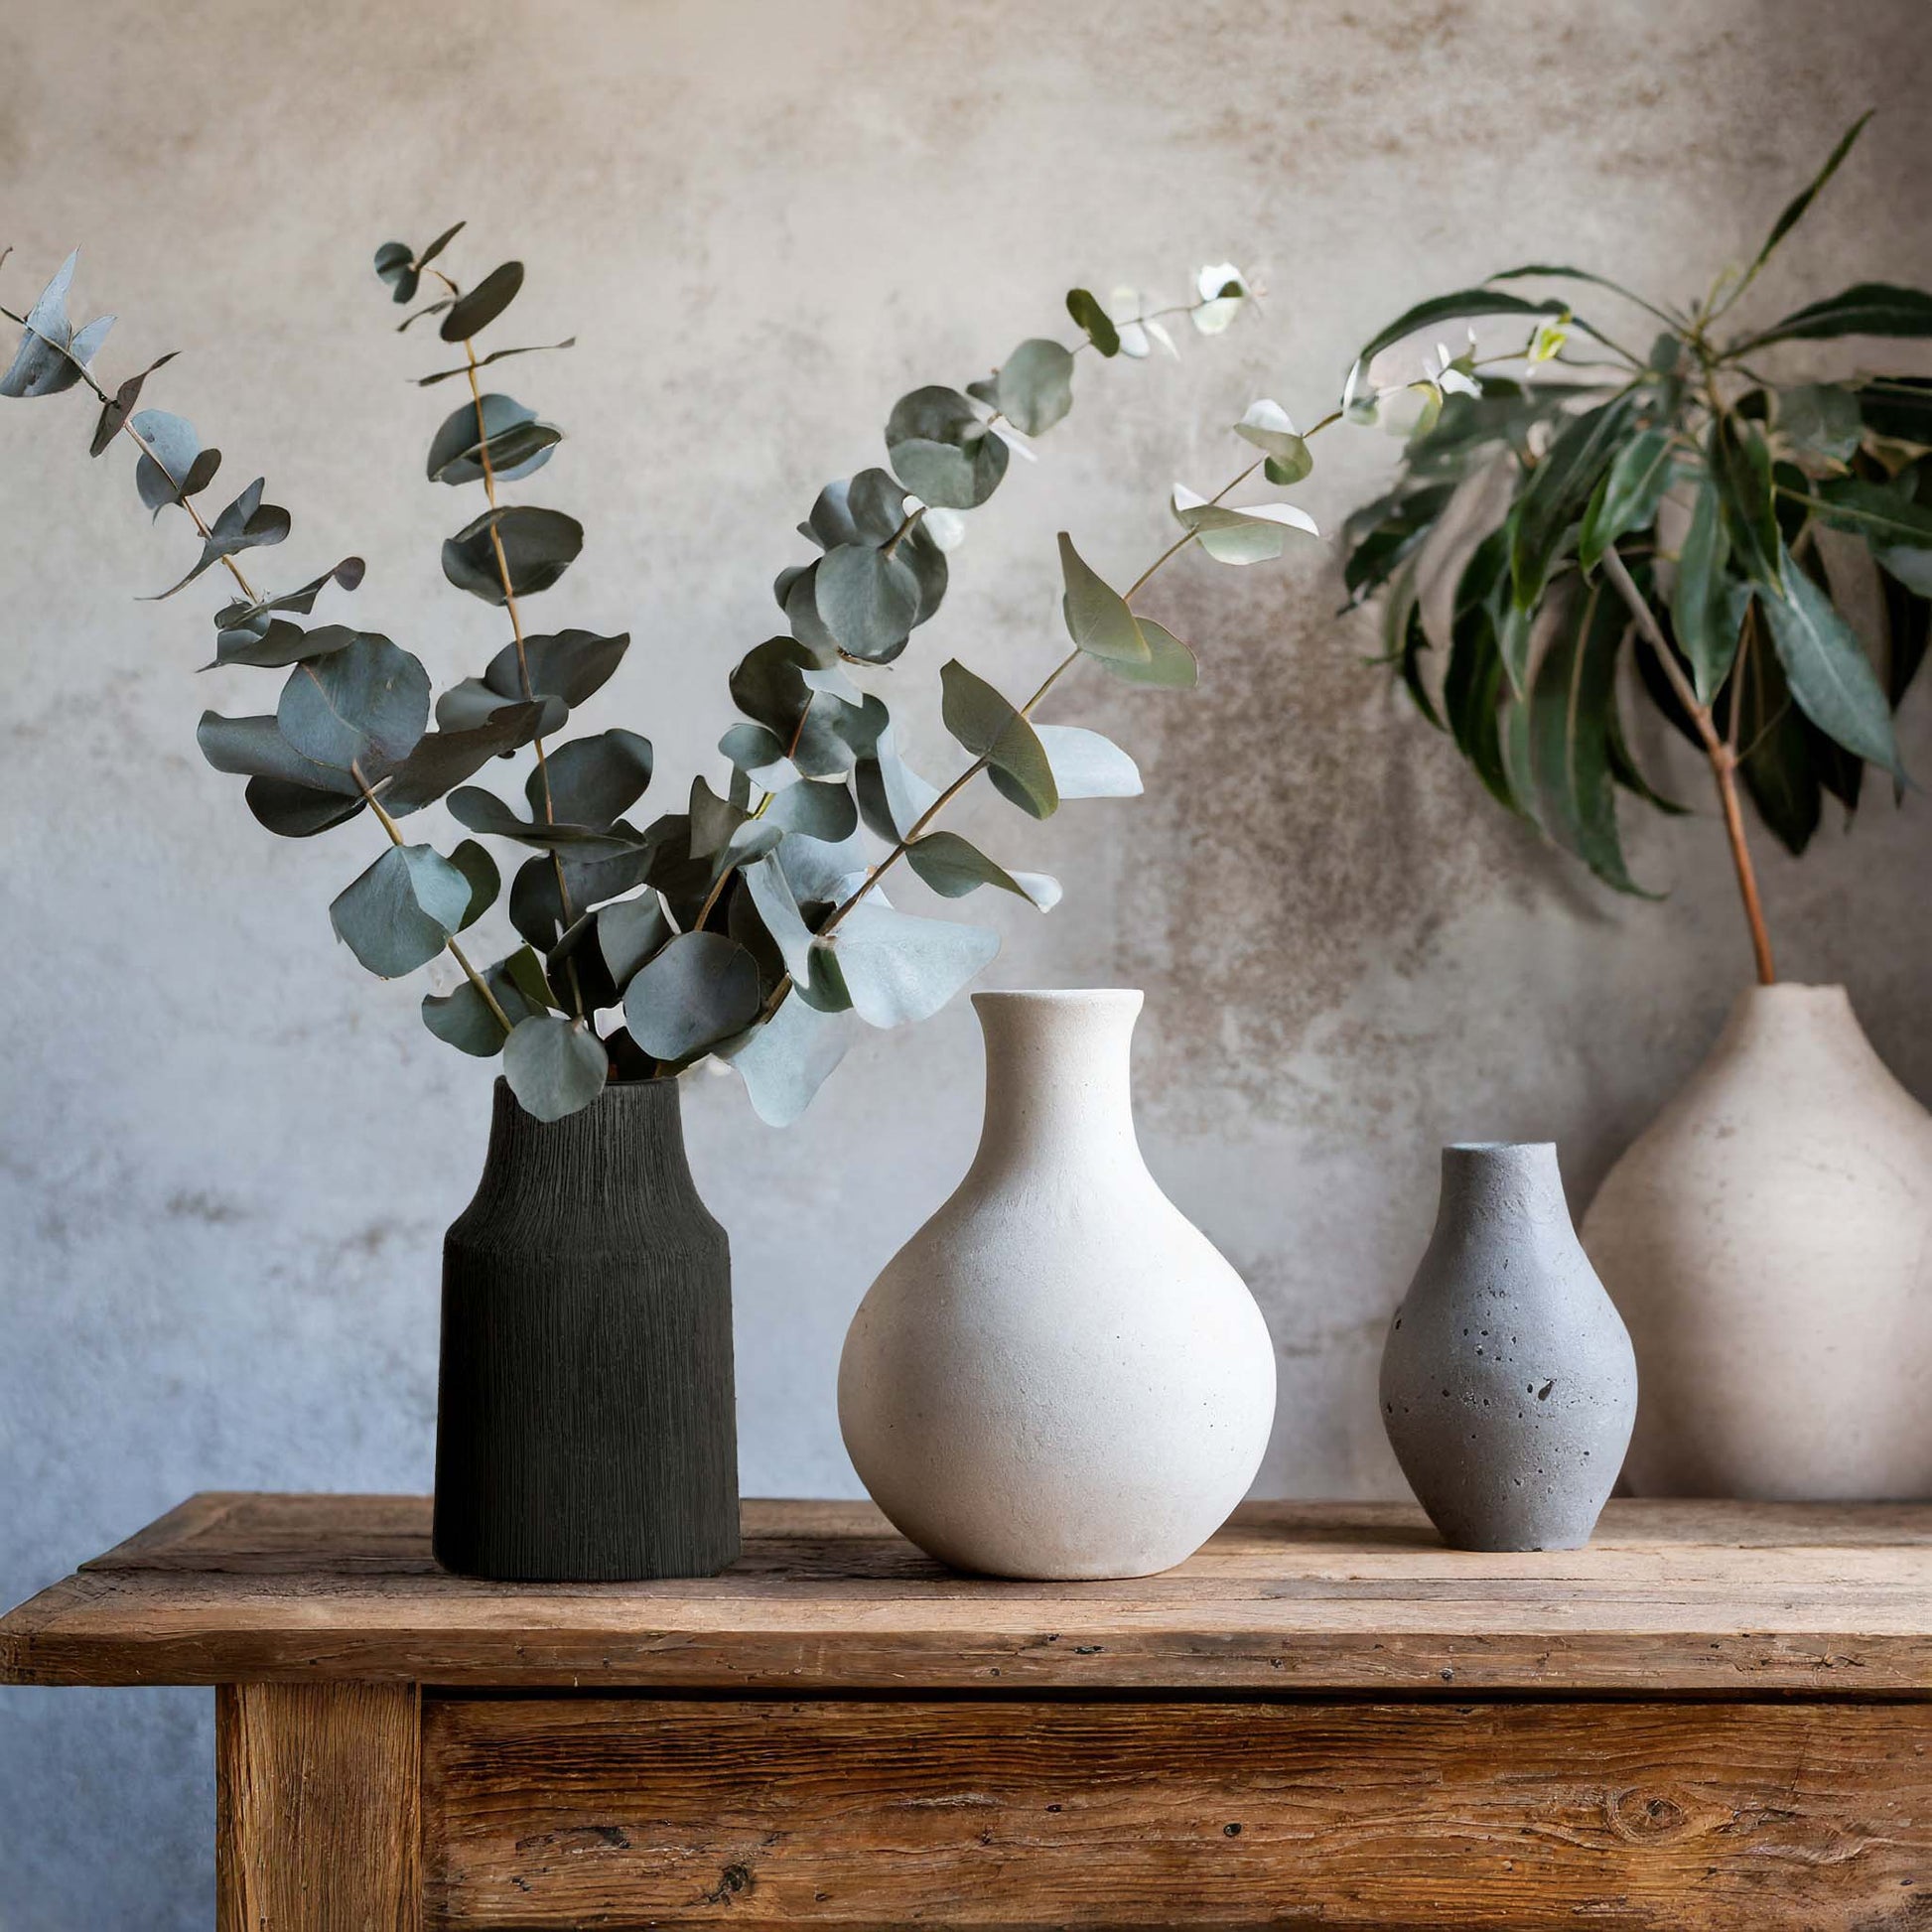 Textured ceramic small vase in matte black, filled with eucalyptus stems, on rustic wood table with ceramic vases.